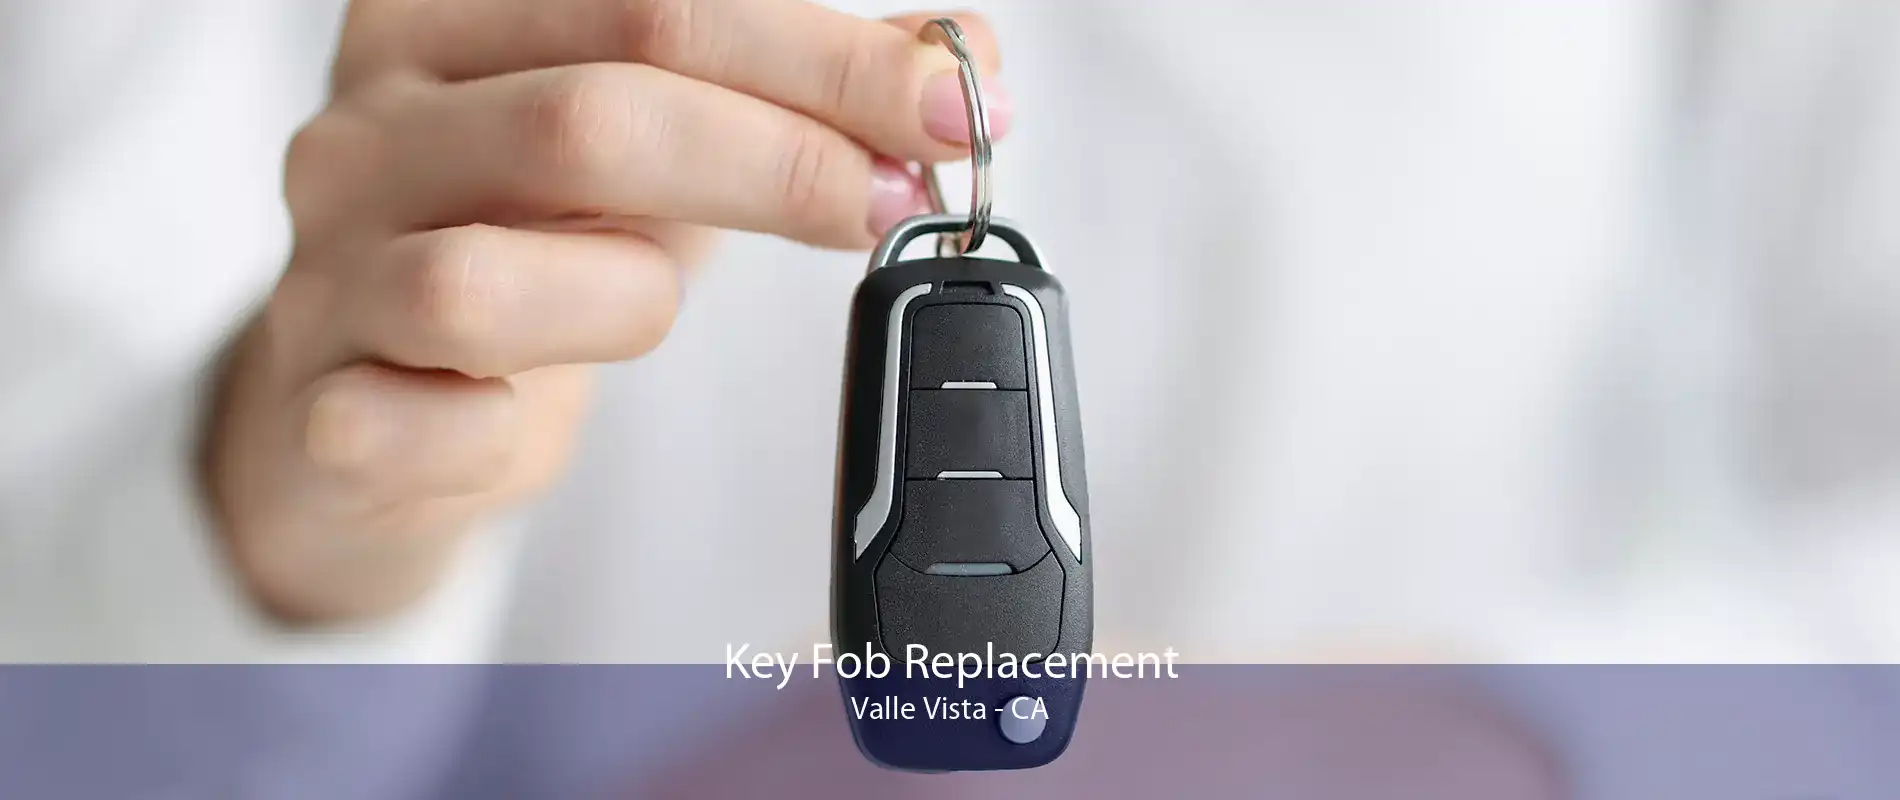 Key Fob Replacement Valle Vista - CA